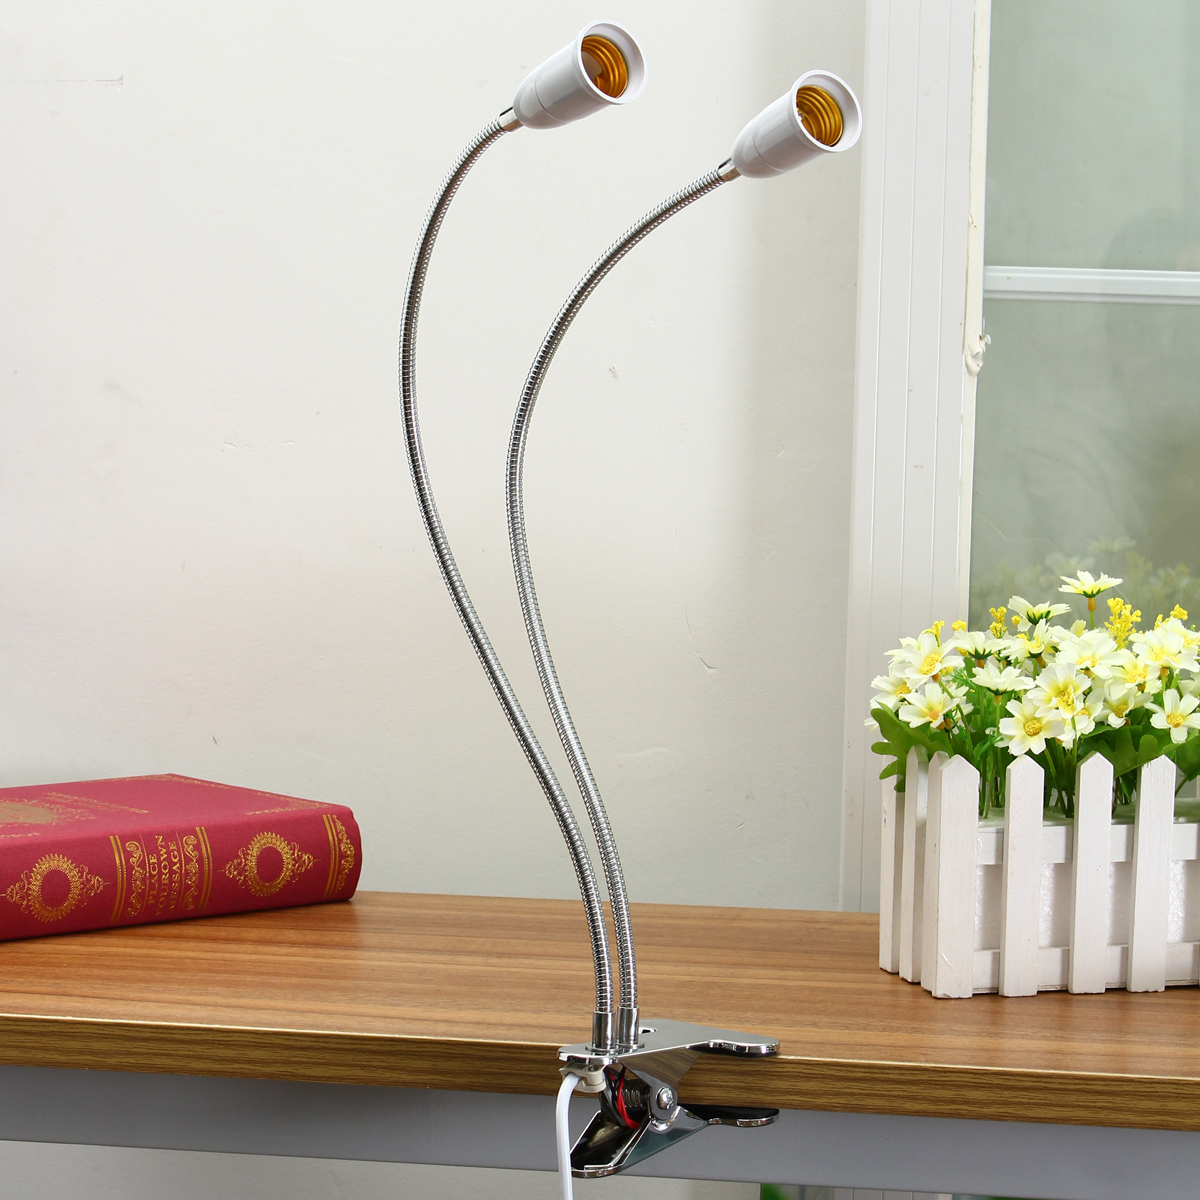 40CM-E27-Flexible-Dual-Head-Clip-Lampholder-Bulb-Adapter-with-Onoff-Switch-for-LED-Grow-Light-1291243-5